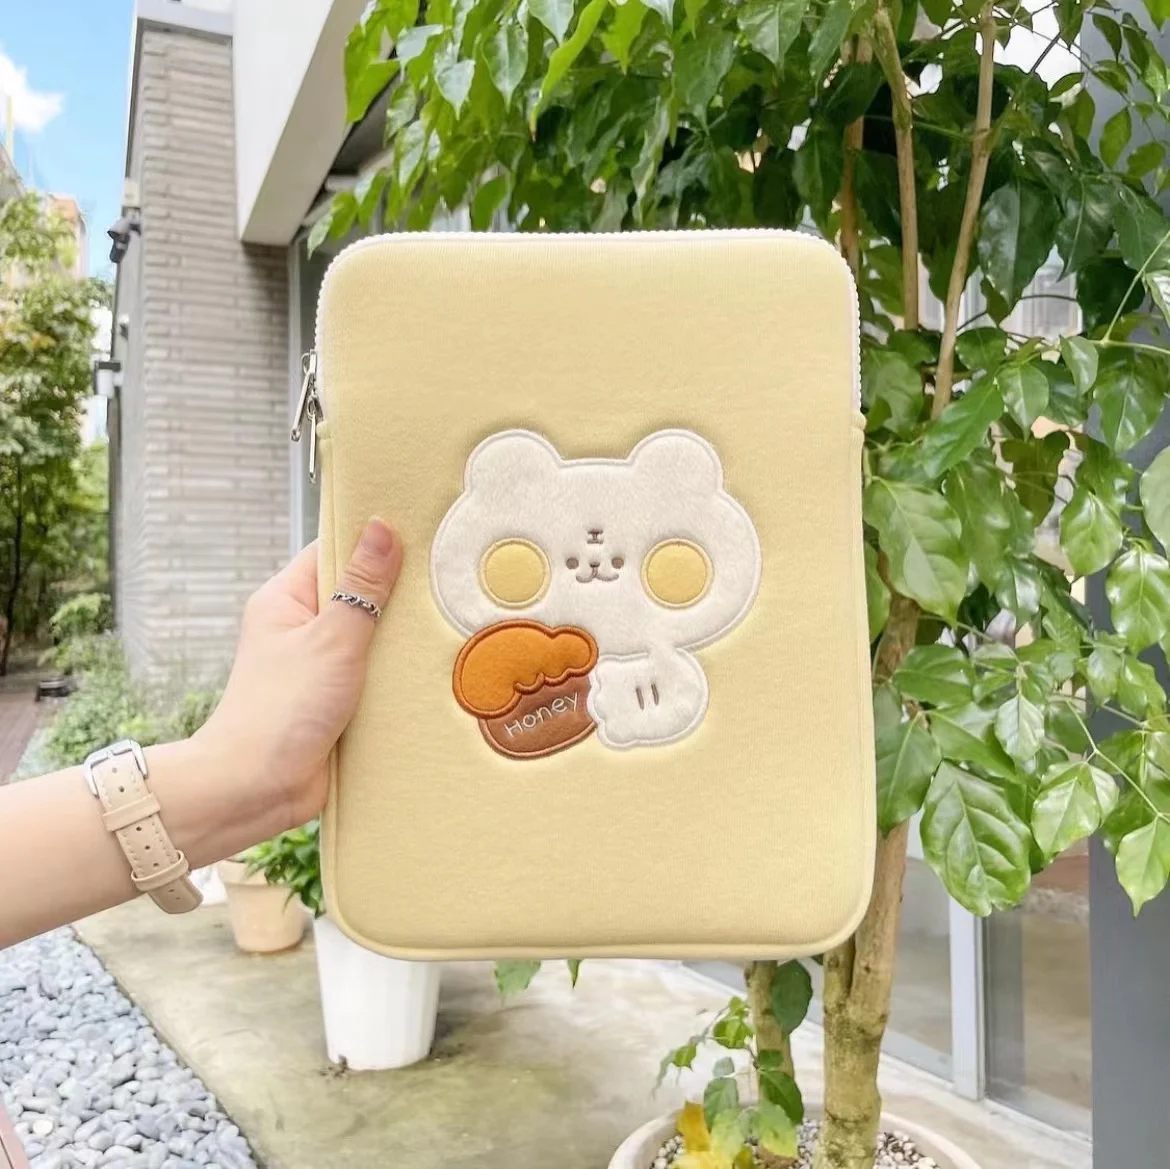 Cute Cartoon Laptop Tablet Inner Case Bag for Ipad Pro 10.5 11 12.9 Air 1 2 3 4 Sleeve Pouch for Macbook Ipad 9.7 10.2 10.9 Inch